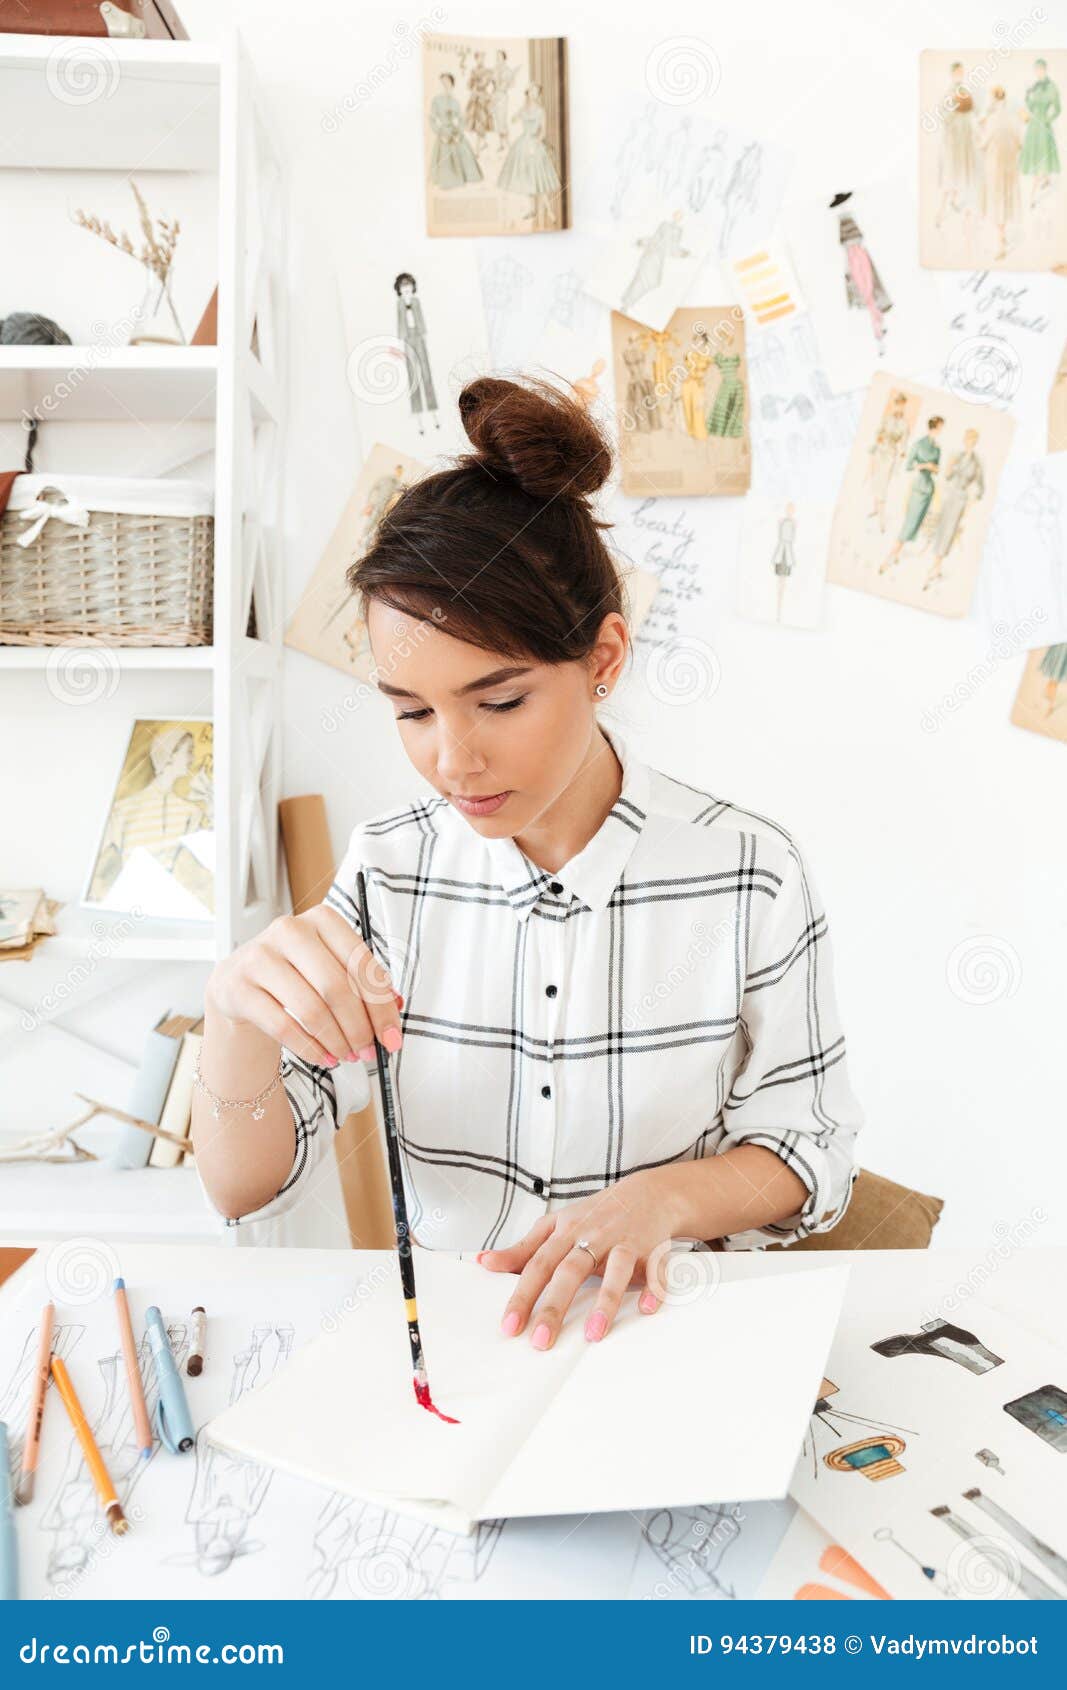 Young Concentrated Woman Fashion Illustrator Stock Photo - Image of ...